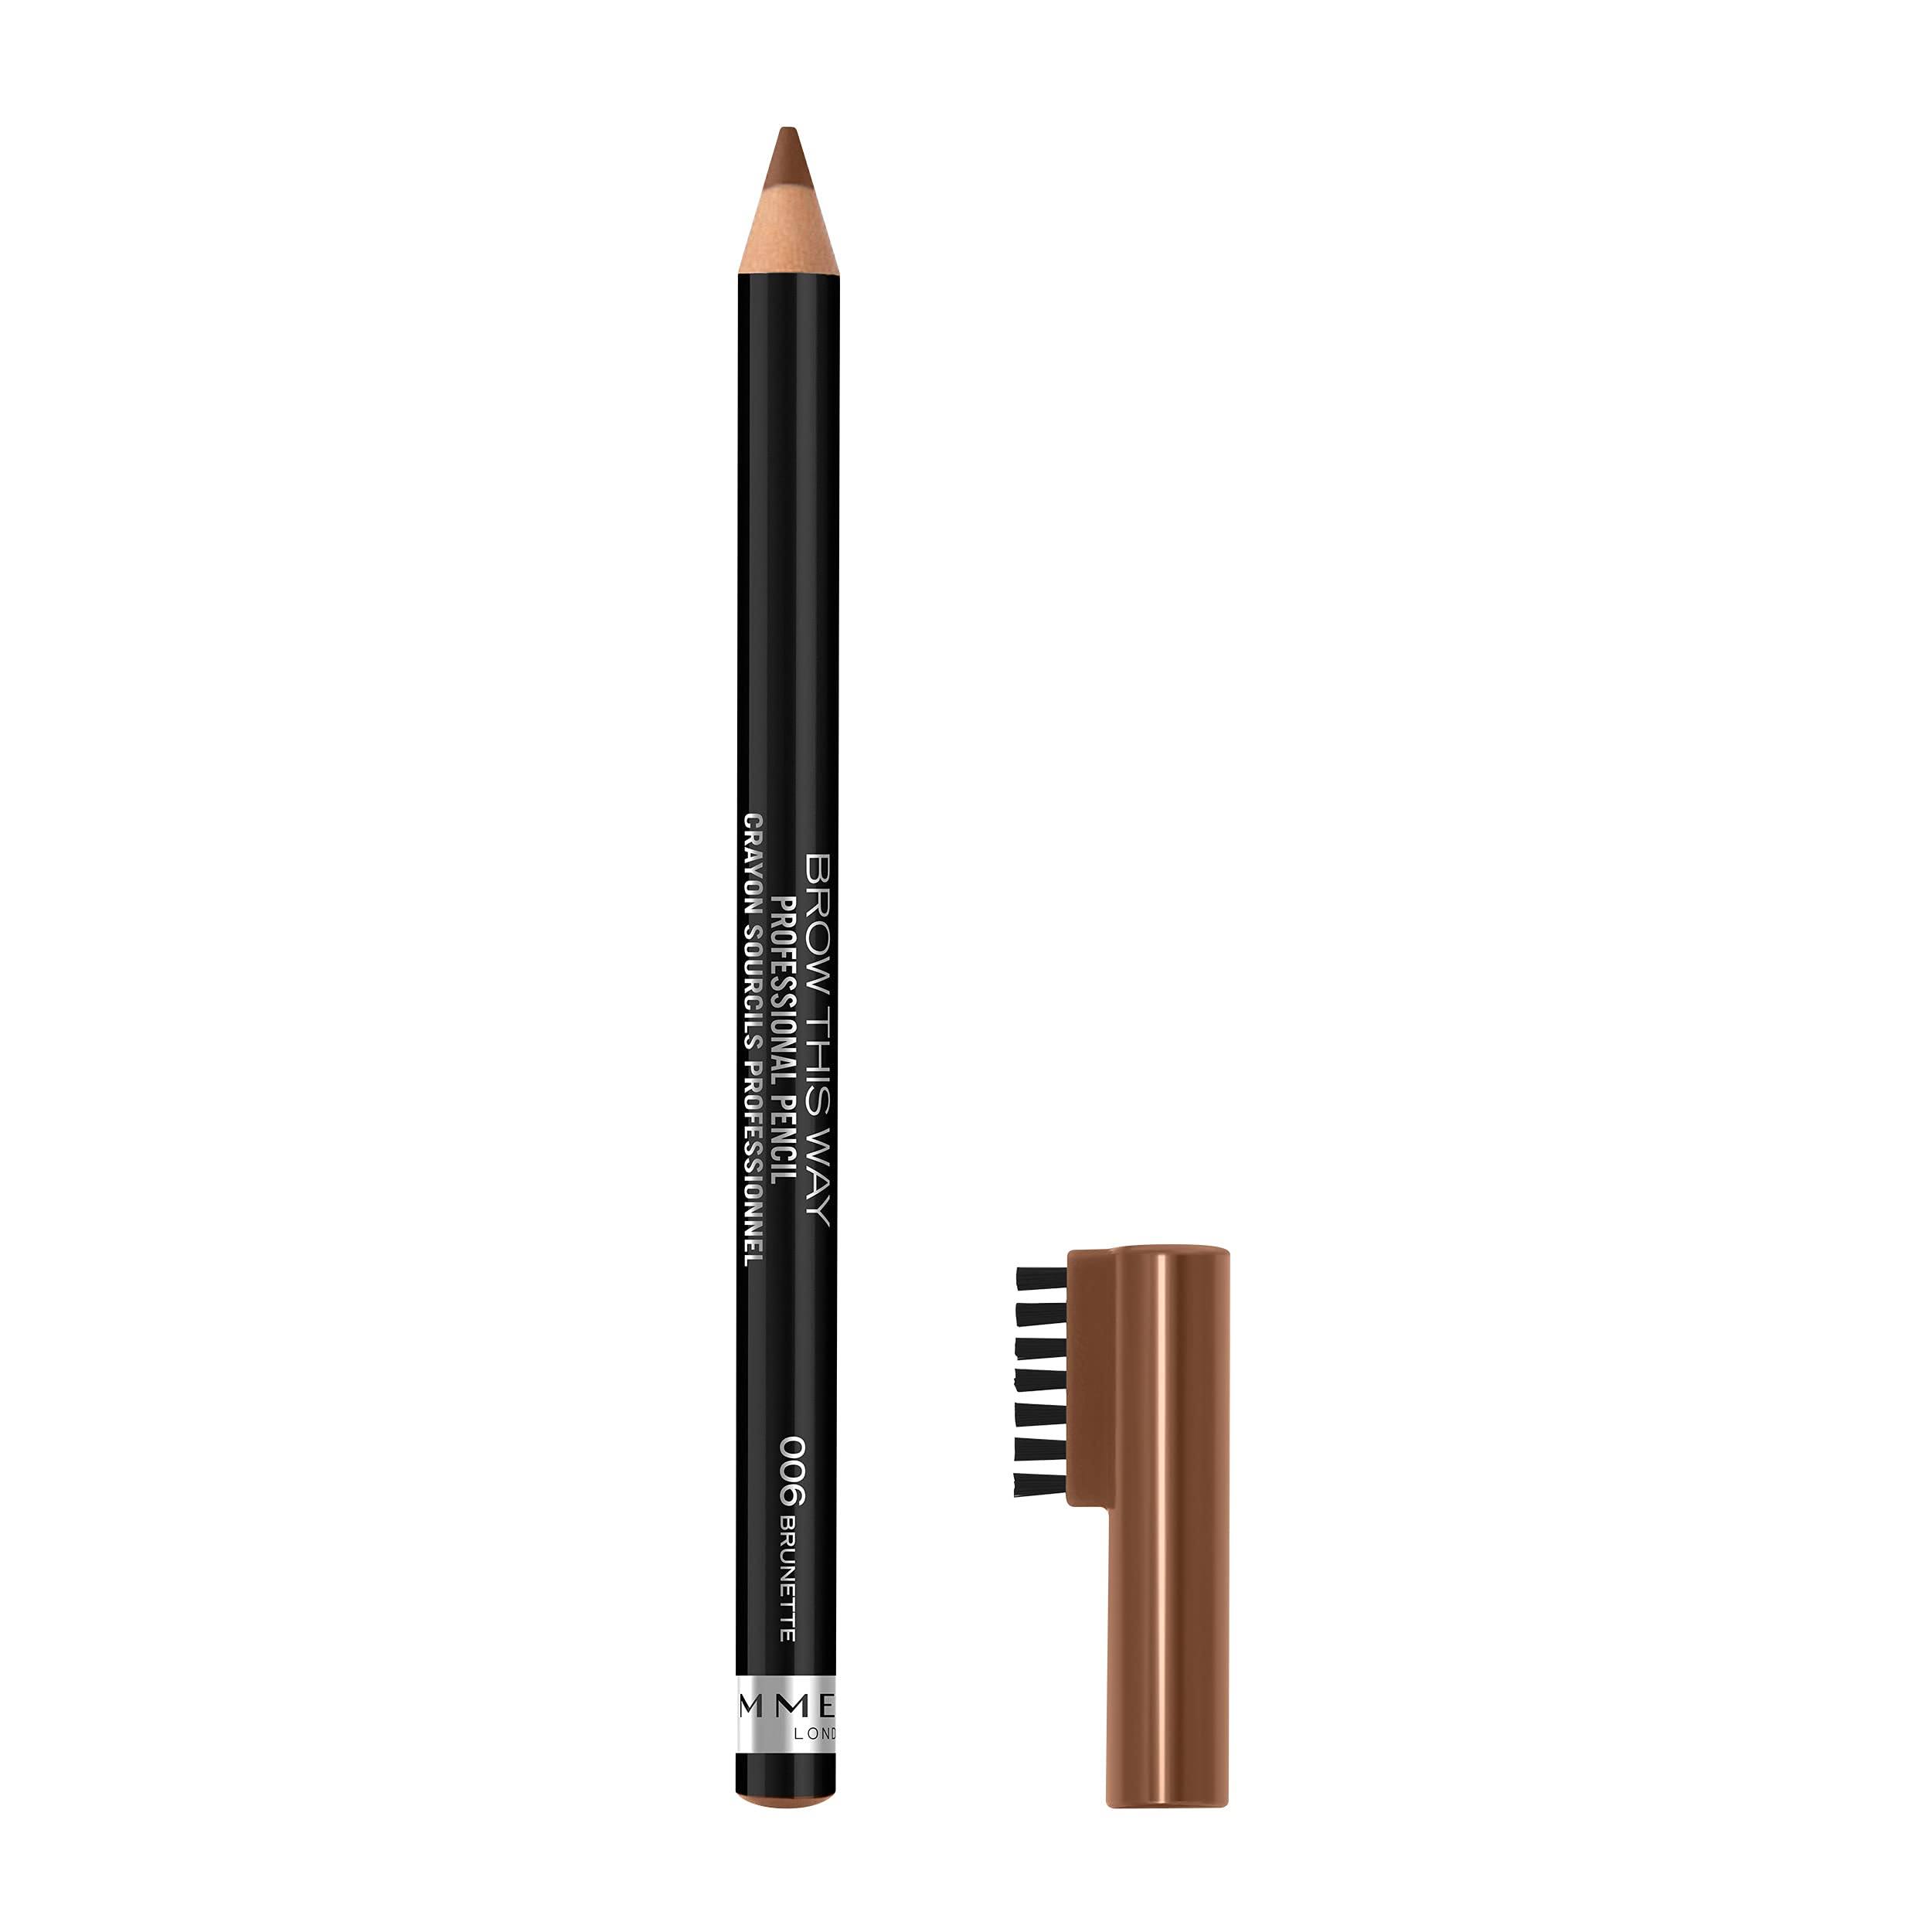 Rimmel London Brow This Way Professional Brow Pencil 006 Brunette 1.4g